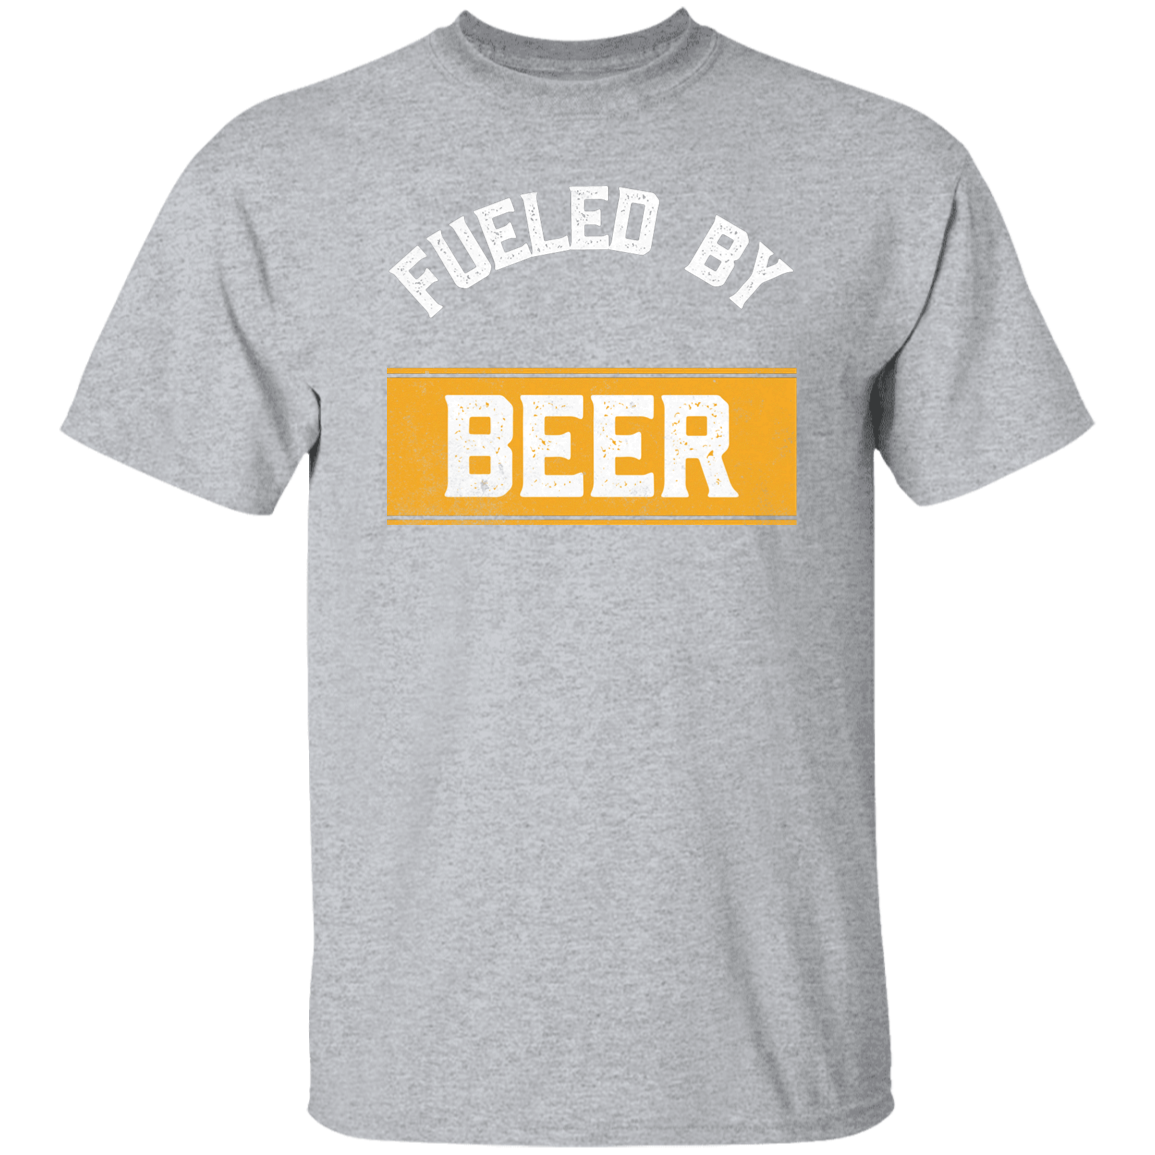 Fueled By Beer T-Shirt